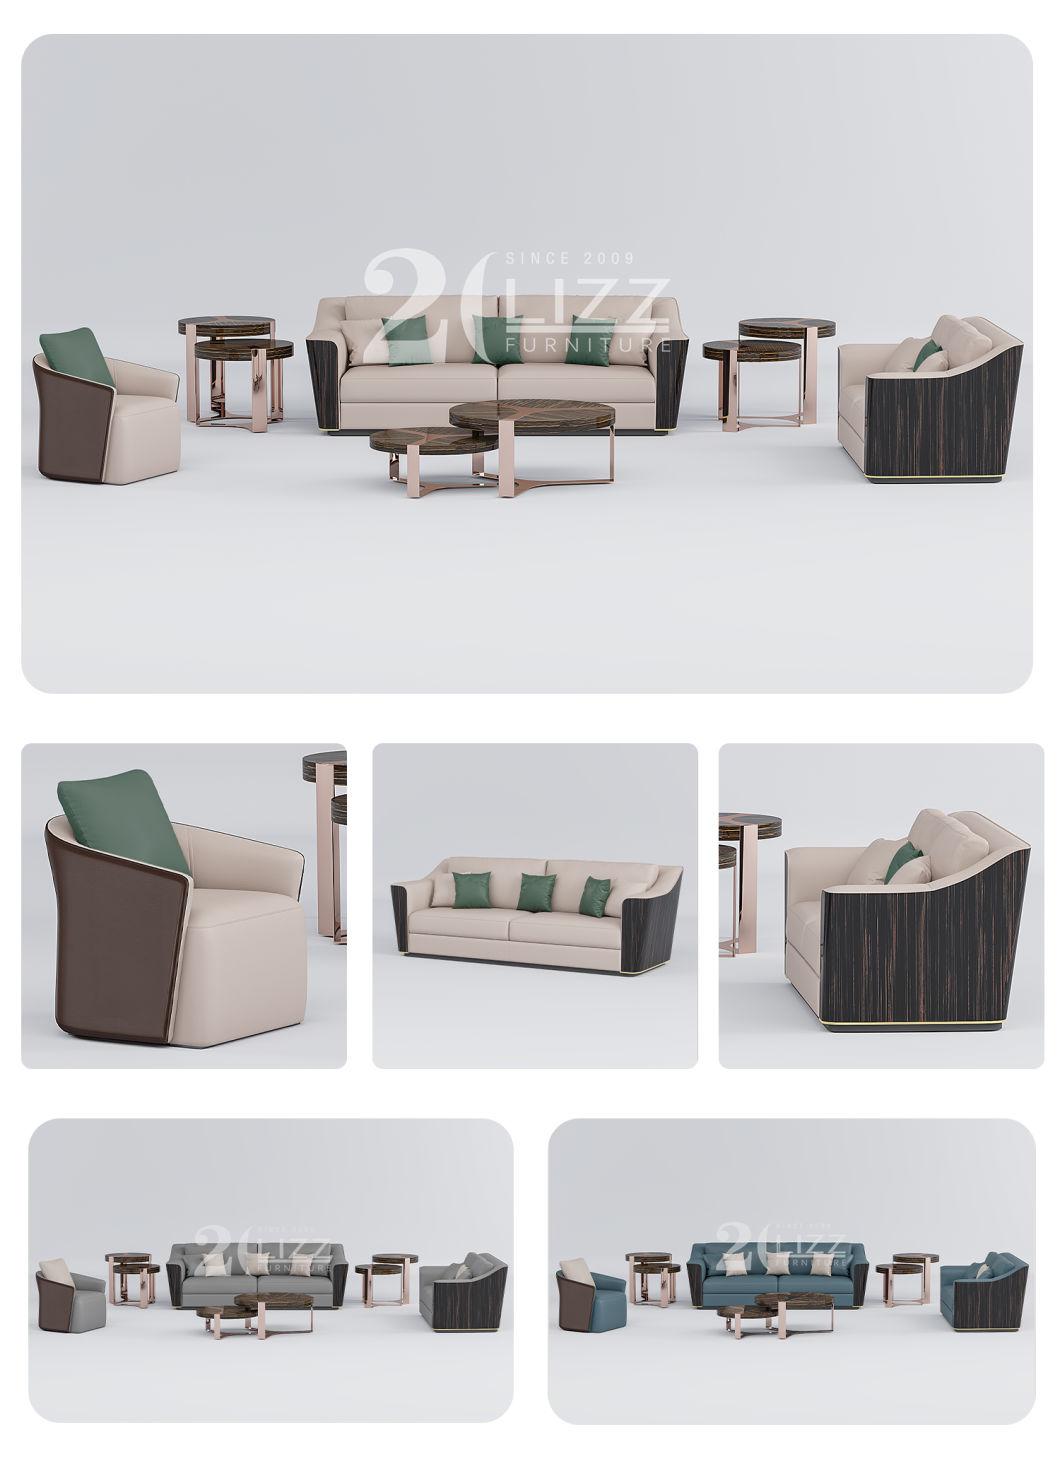 Factory Direct Sell American Style Living Room Real Leather Sofa with Unique Coffee Table Modern Home Furniture